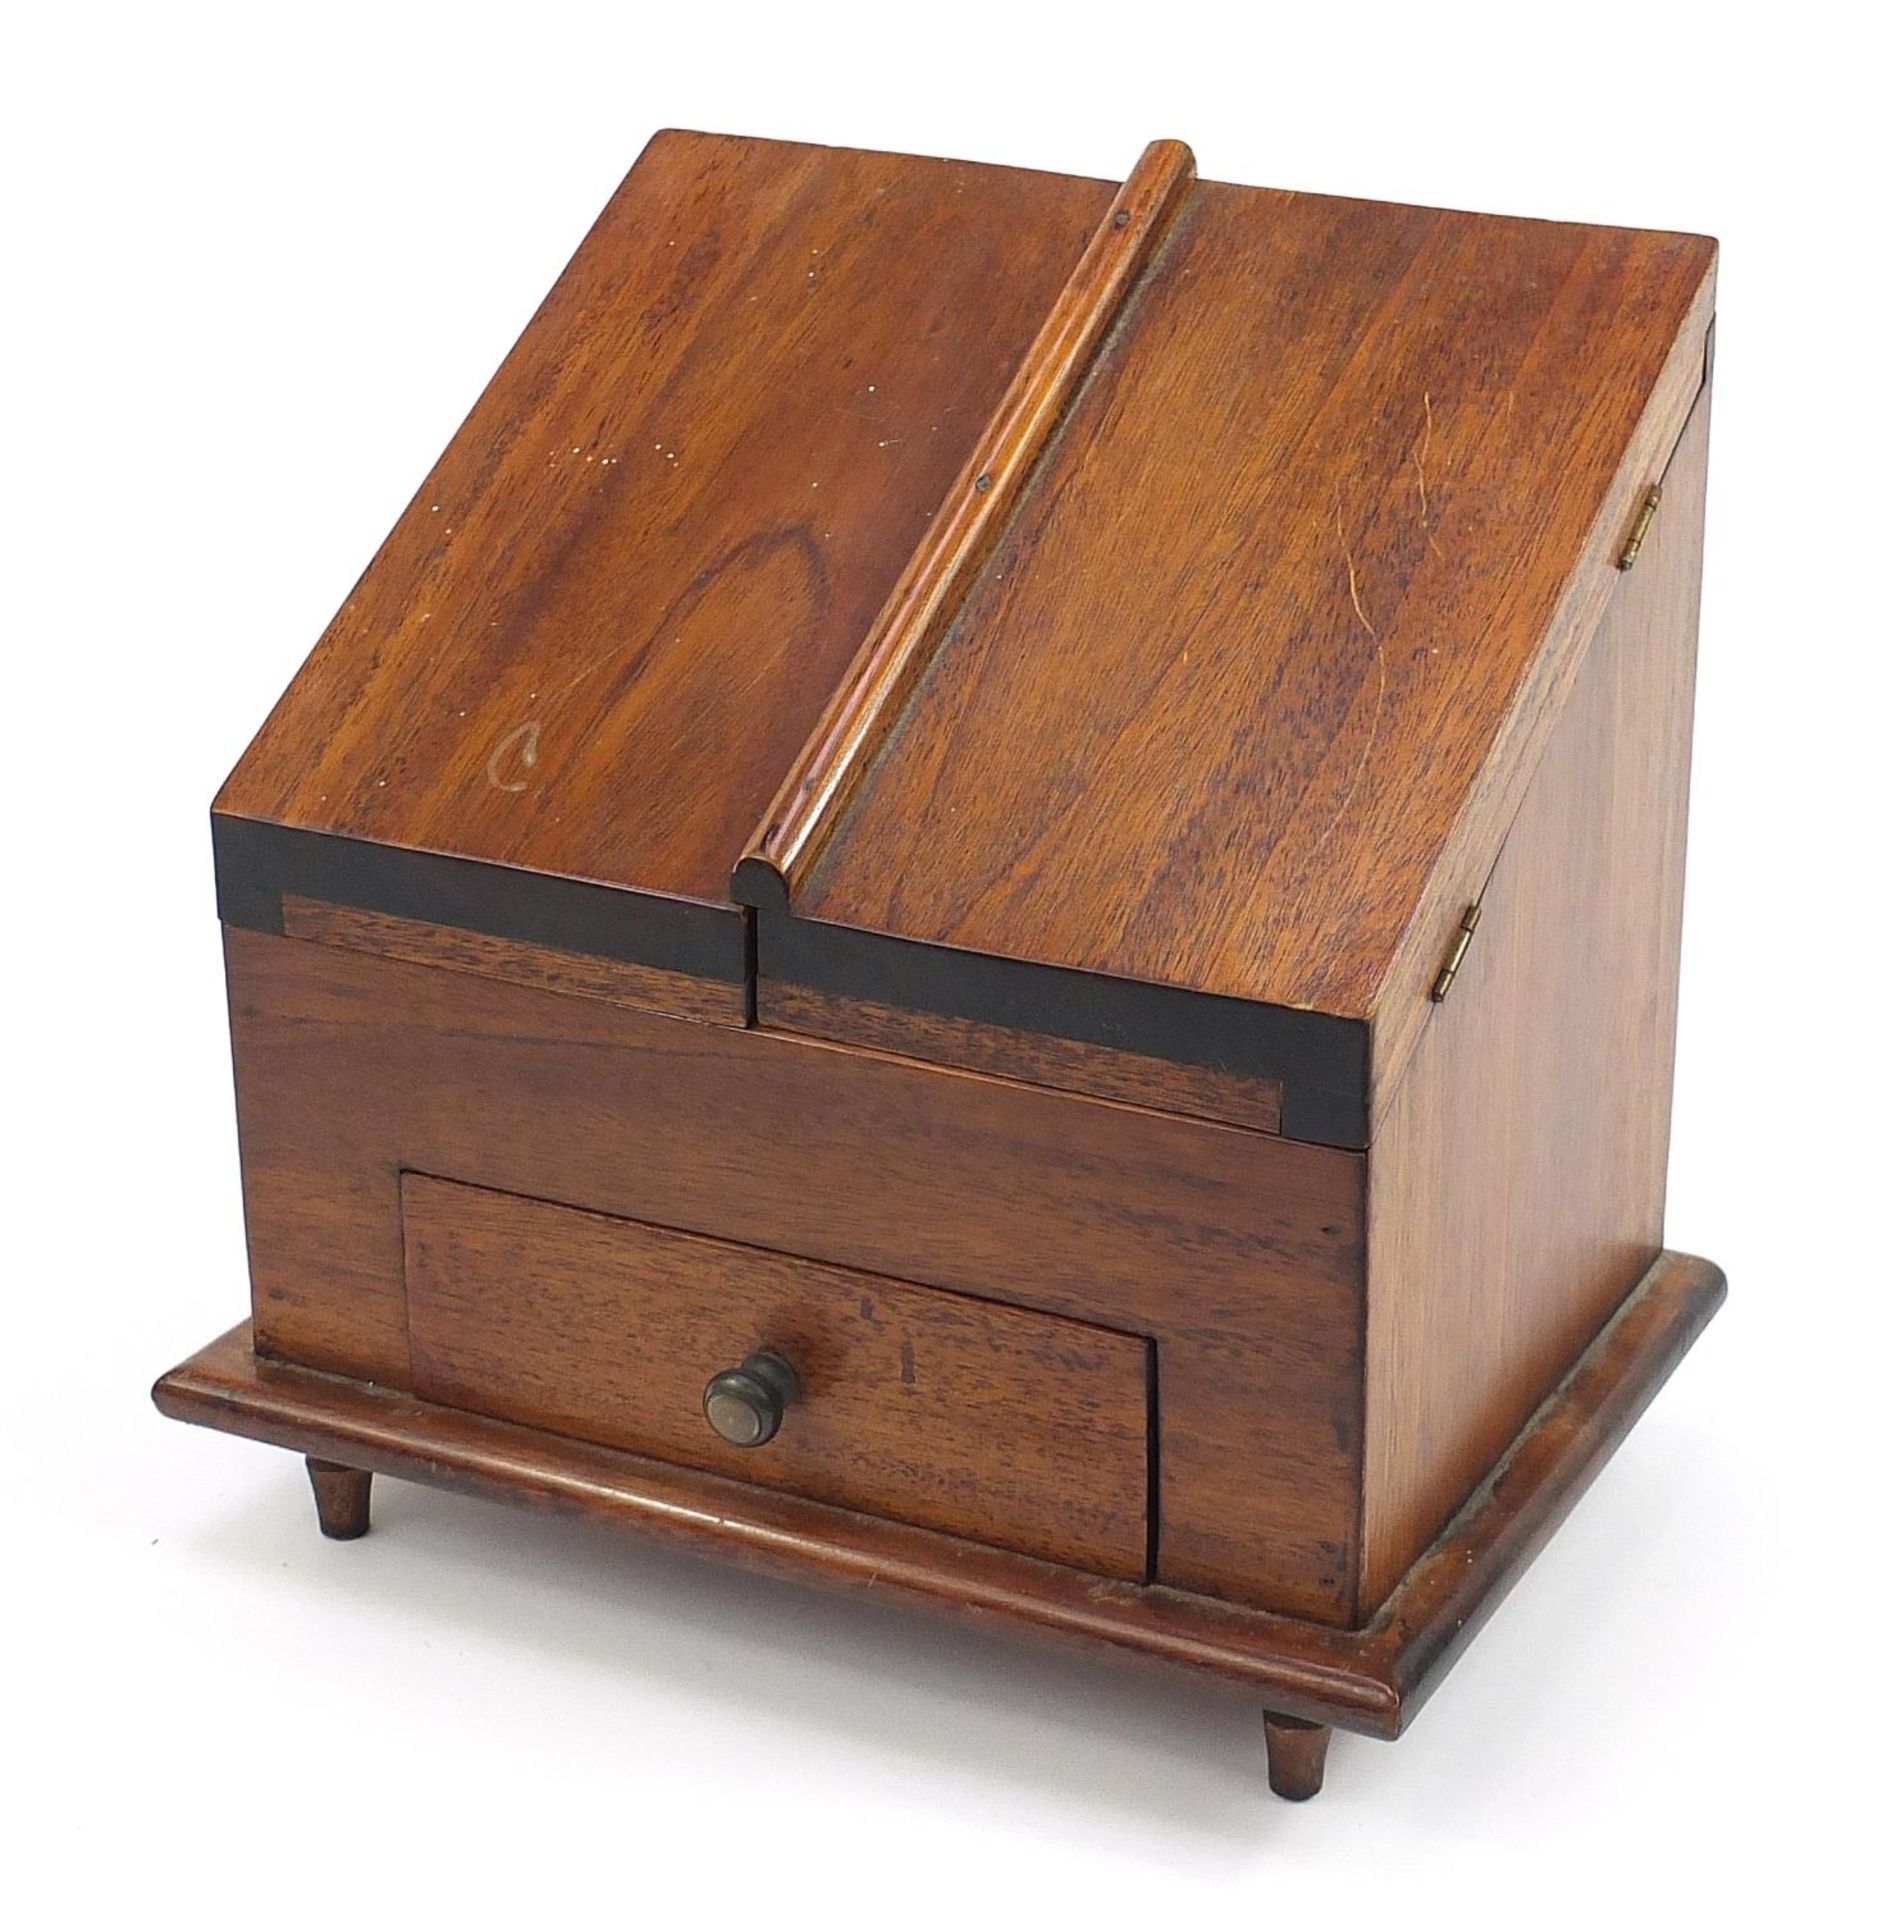 Hardwood table top stationary cabinet with drawer to the base, 32cm H x 30cm W x 23cm D